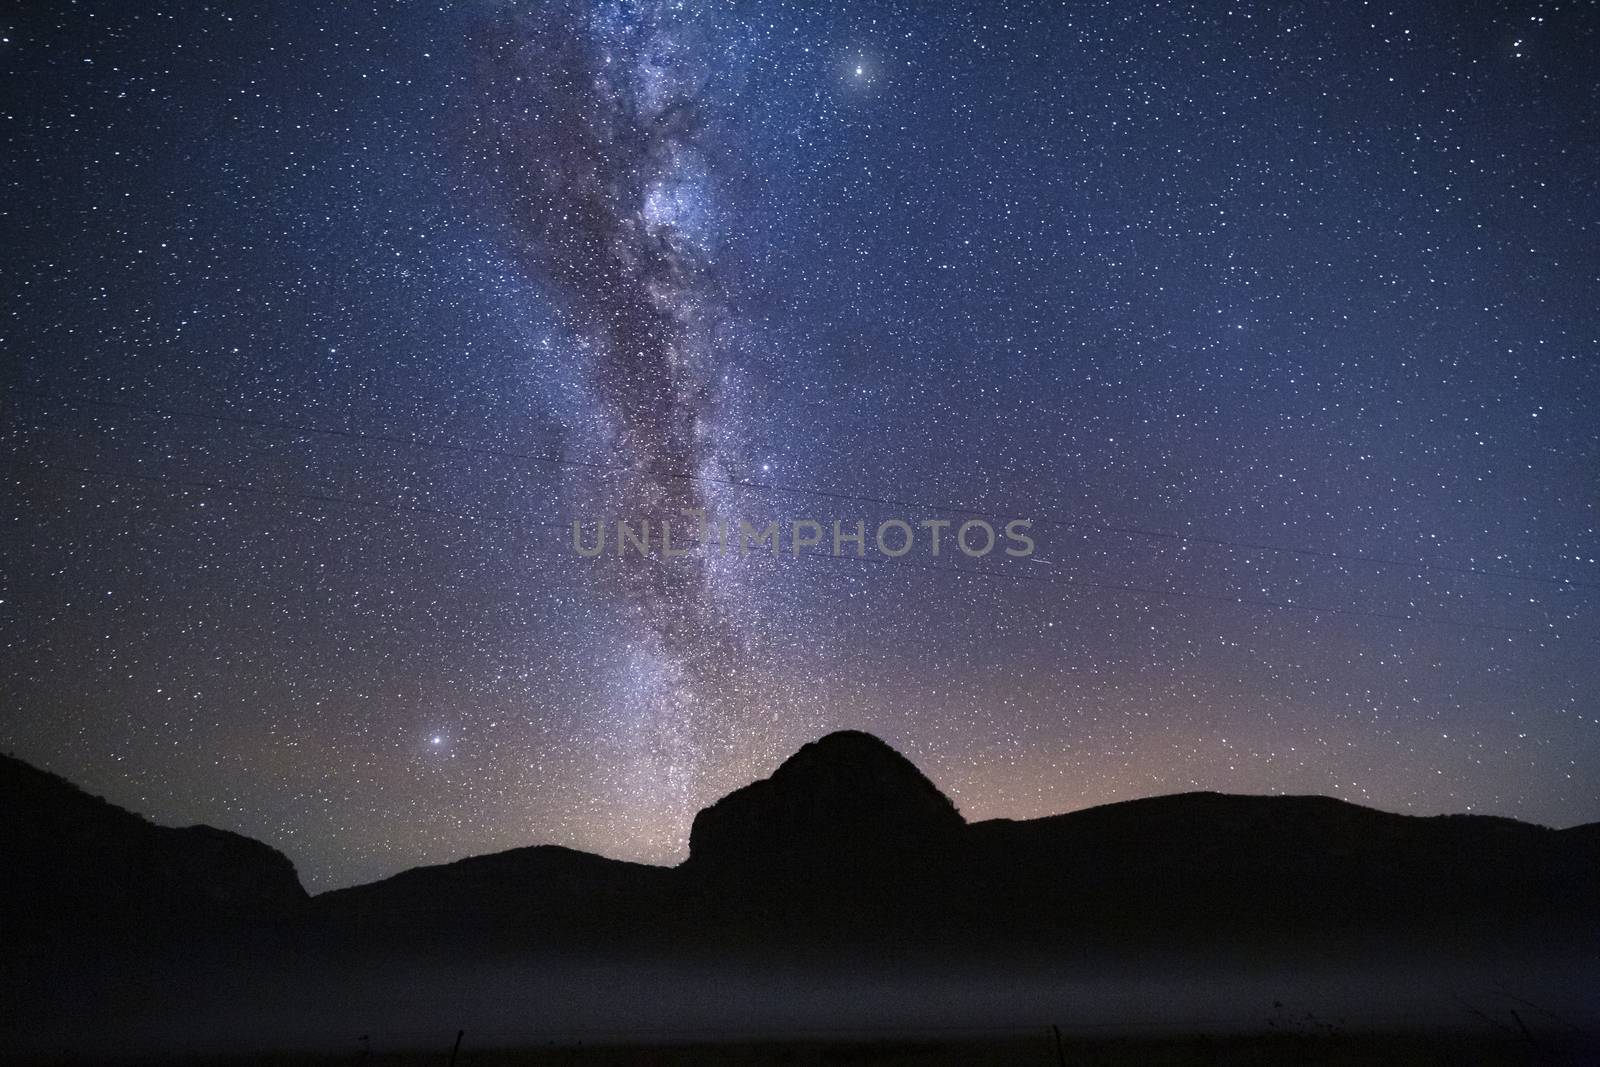 Billions of stars forming the Milky Way shining brightly overhead the Capertee Valley with a pre dawn glow on the horizon and a light mist over the land..